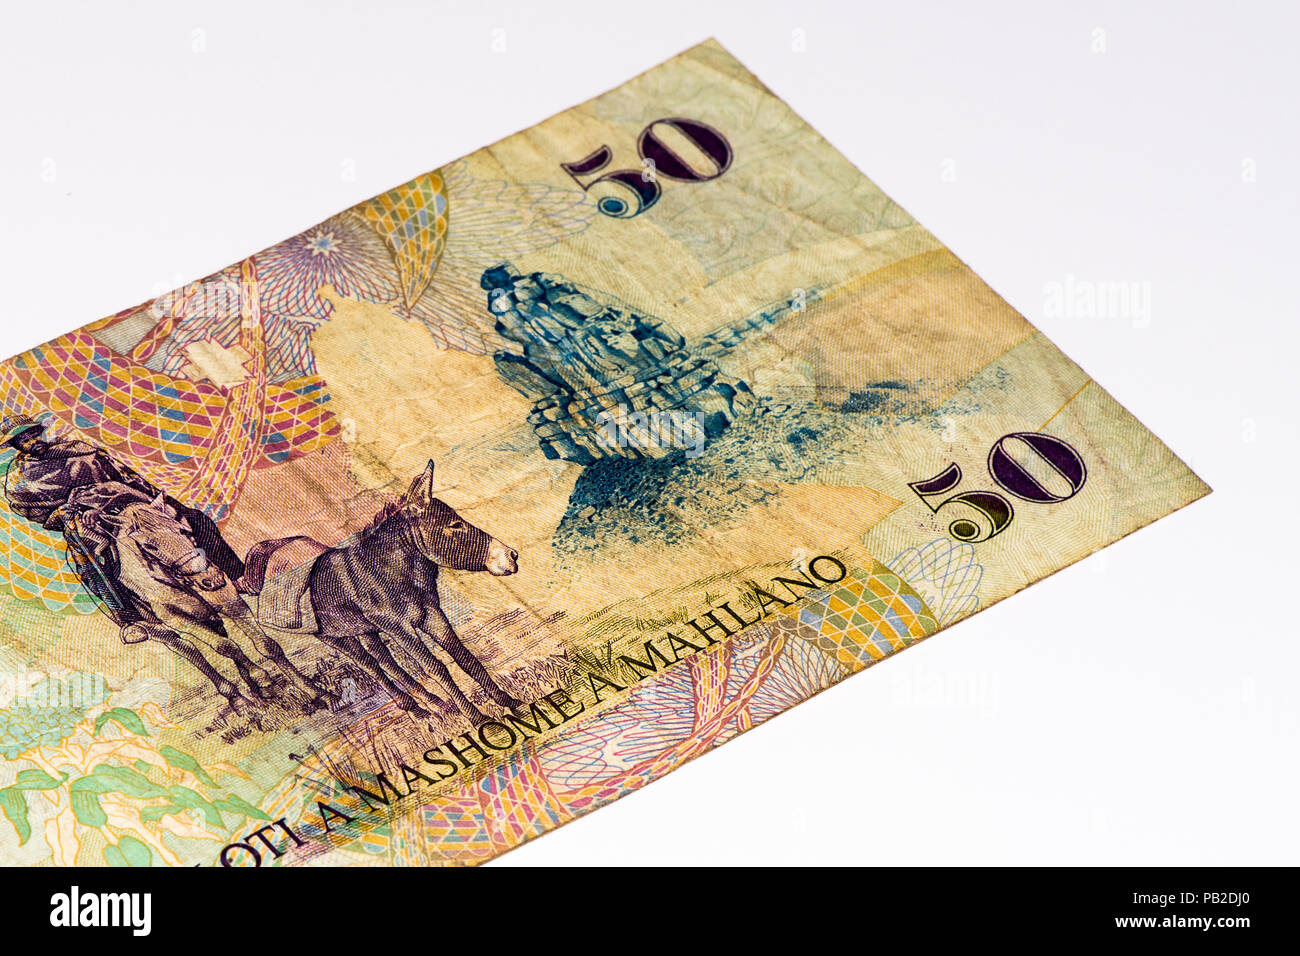 50 Lesotho loti bank note. Lesotho loti is the national currency of Lesotho Stock Photo